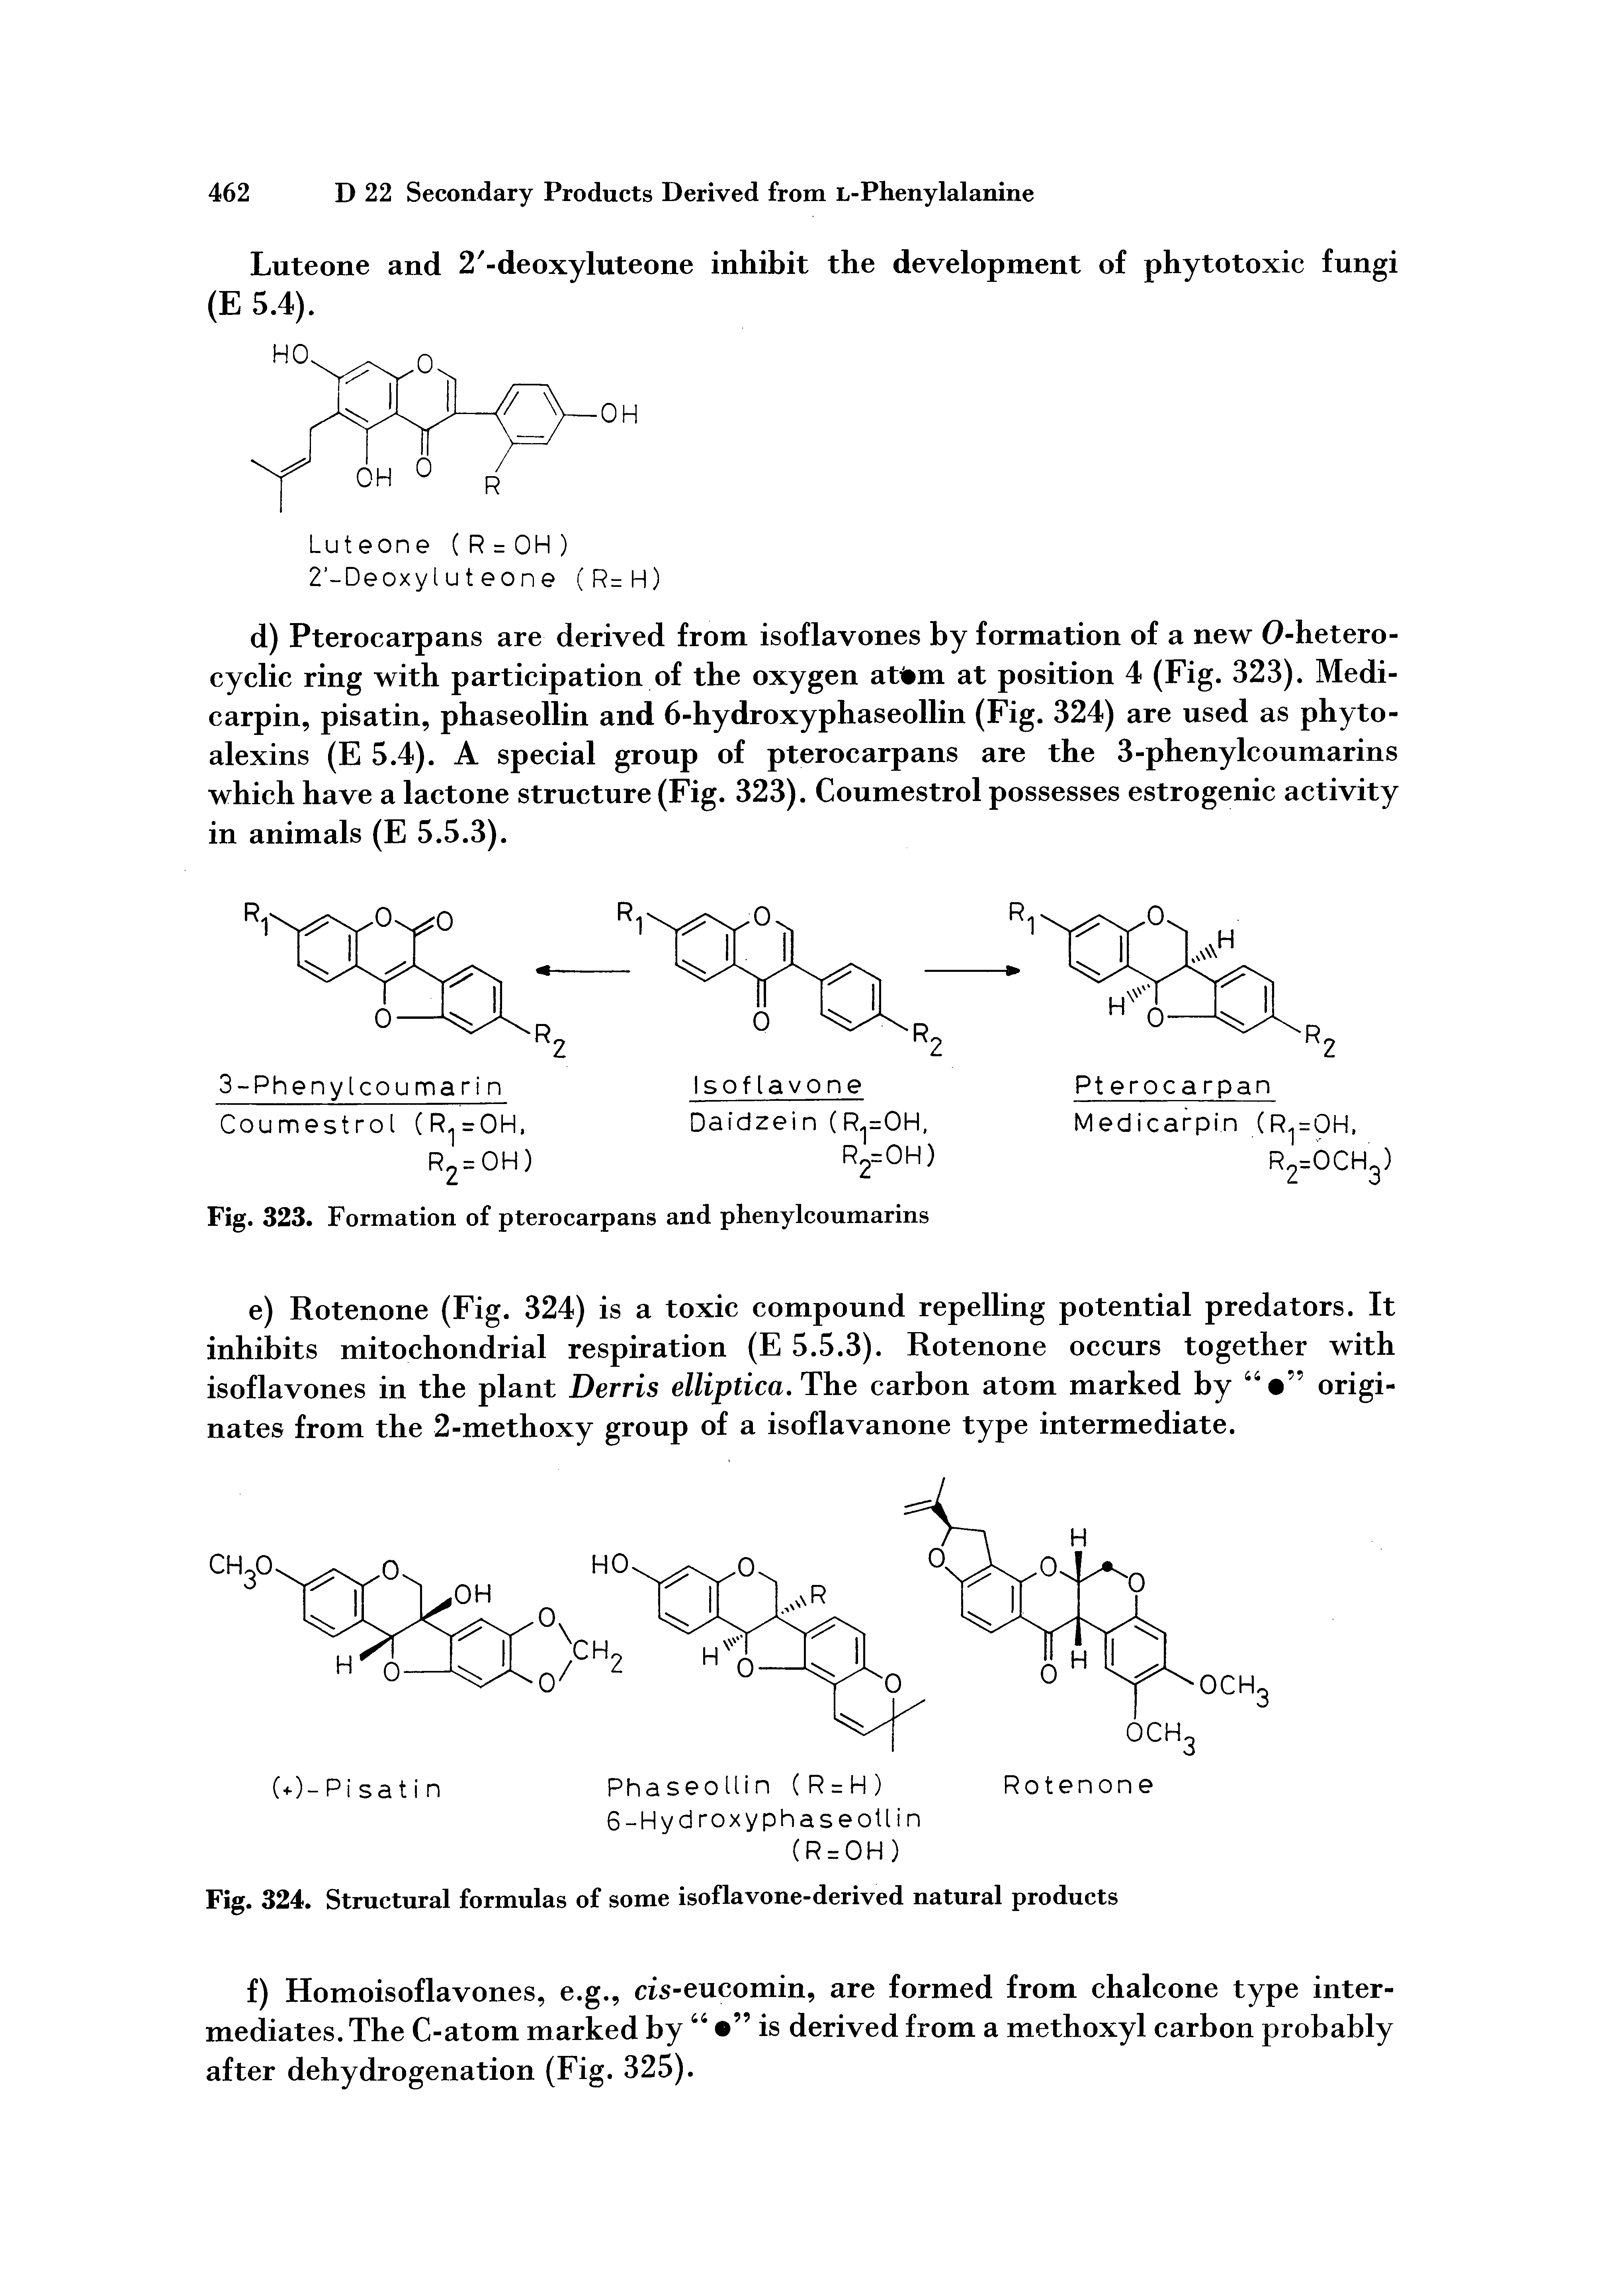 Fig. 324. Structural formulas of some isoflavone-derived natural products...